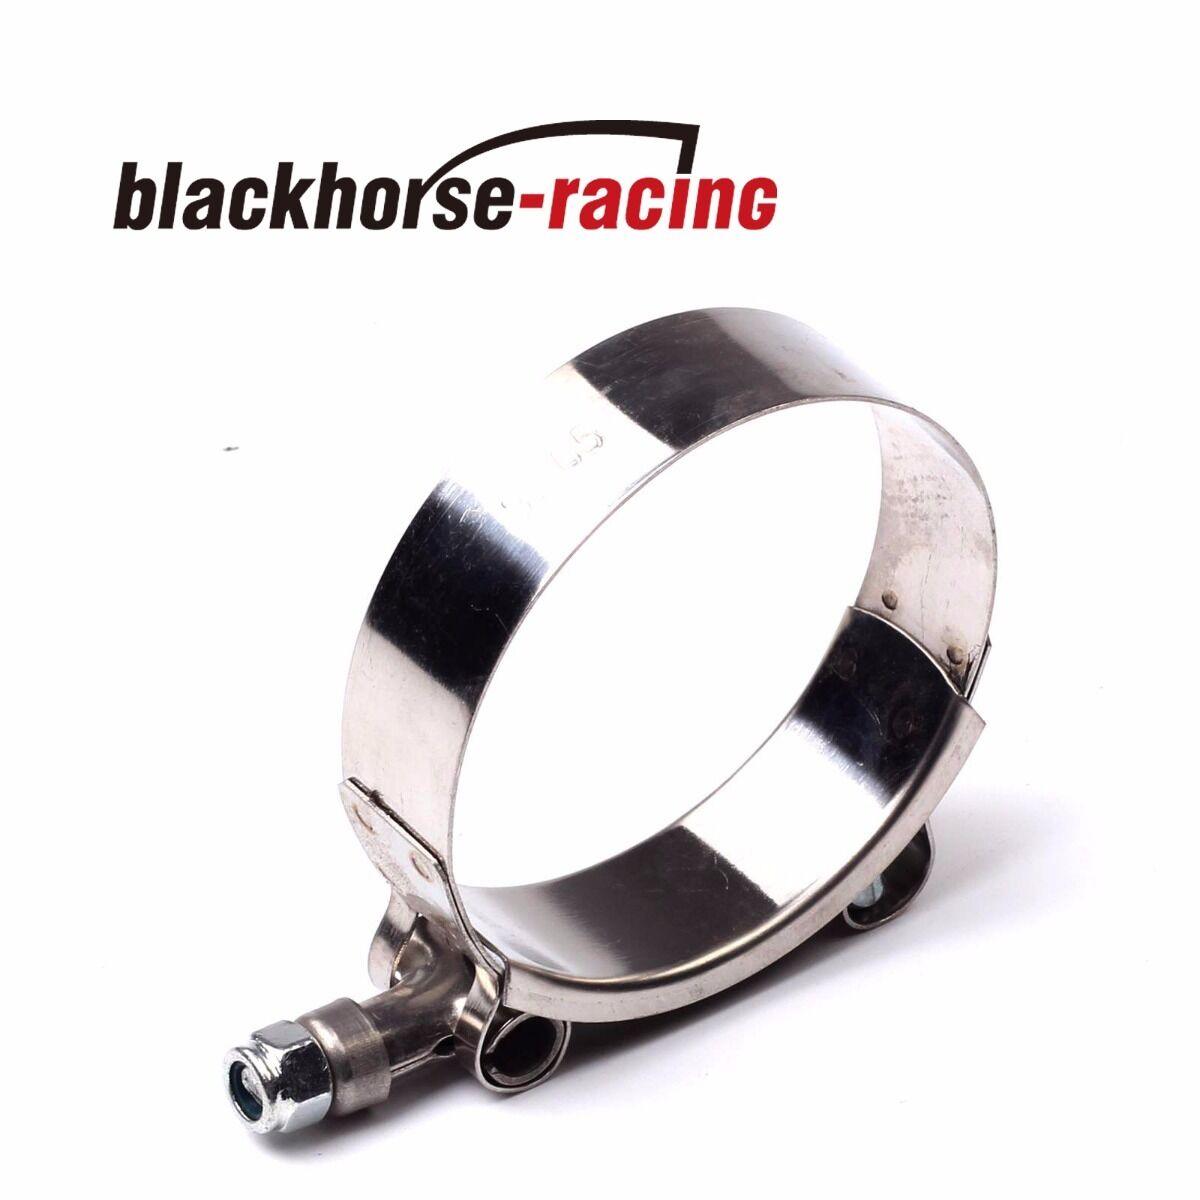 1PC 301 Stainless Steel T Bolt Clamps Clamp ID 2.25" 57MM Intercooler Intake - www.blackhorse-racing.com